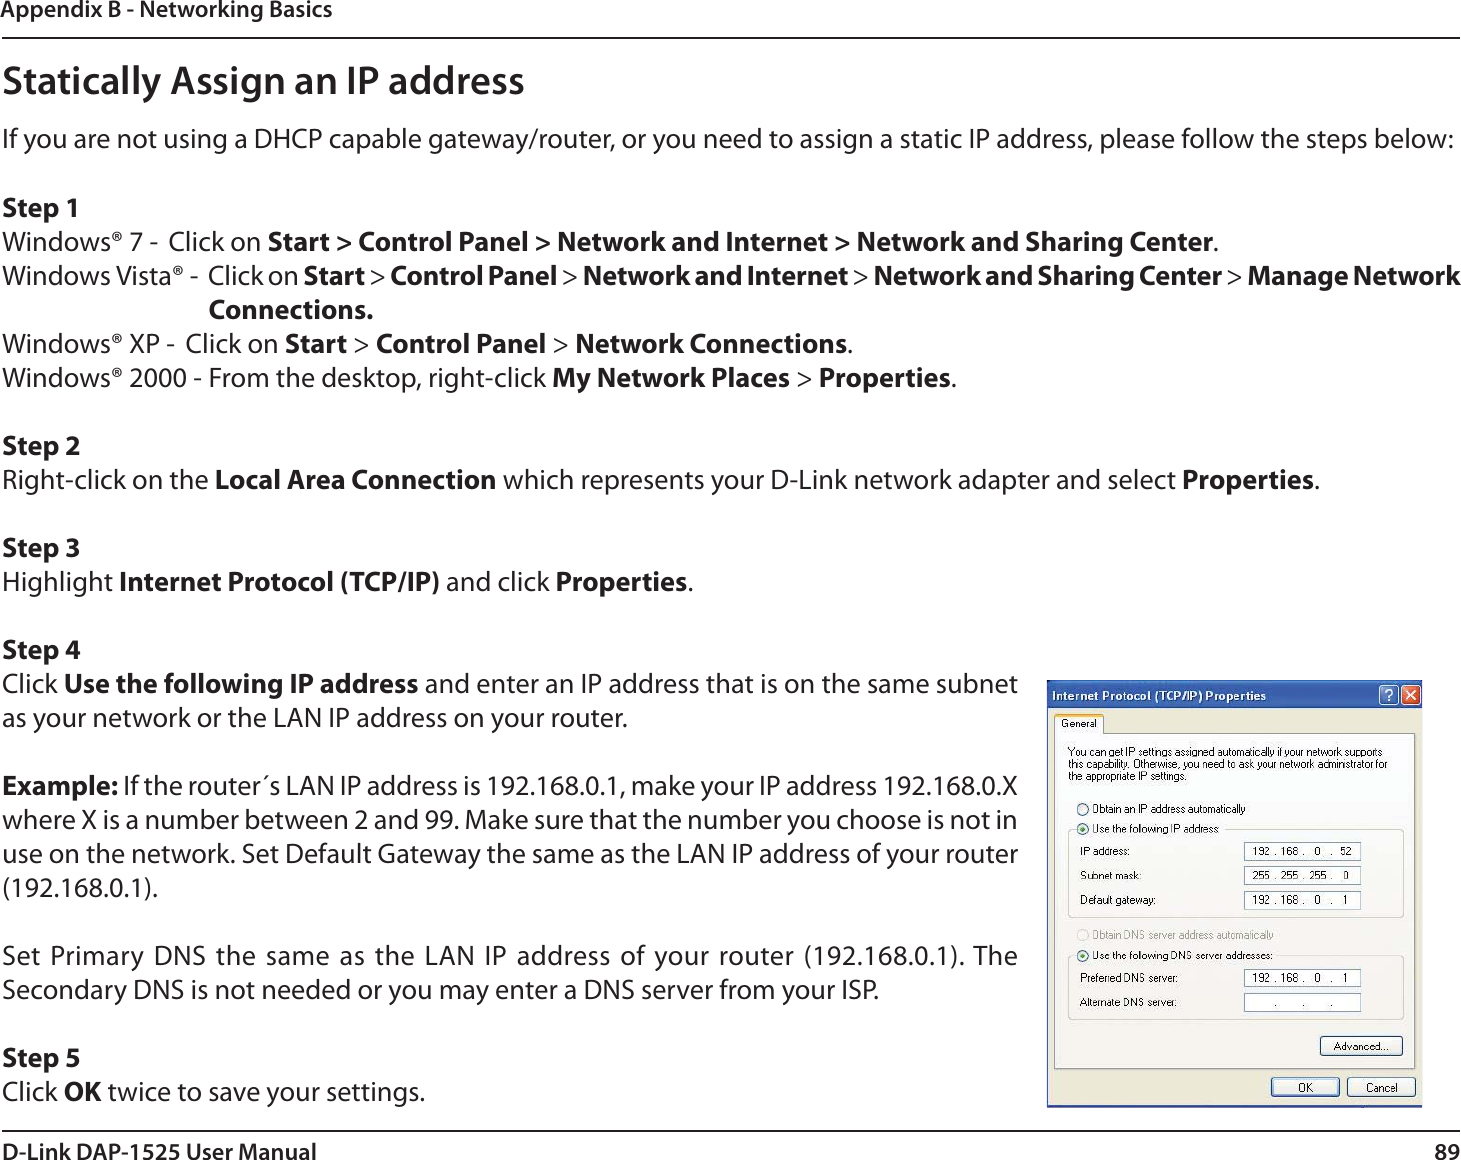 89D-Link DAP-1525 User ManualAppendix B - Networking BasicsStatically Assign an IP addressIf you are not using a DHCP capable gateway/router, or you need to assign a static IP address, please follow the steps below:Step 1Windows® 7 -  Click on Start &gt; Control Panel &gt; Network and Internet &gt; Network and Sharing Center.Windows Vista® -  Click on Start &gt; Control Panel &gt; Network and Internet &gt; Network and Sharing Center &gt; Manage Network Connections.Windows® XP -  Click on Start &gt; Control Panel &gt; Network Connections.Windows® 2000 - From the desktop, right-click My Network Places &gt; Properties.Step 2Right-click on the Local Area Connection which represents your D-Link network adapter and select Properties.Step 3Highlight Internet Protocol (TCP/IP) and click Properties.Step 4Click Use the following IP address and enter an IP address that is on the same subnet as your network or the LAN IP address on your router. Example: If the router´s LAN IP address is 192.168.0.1, make your IP address 192.168.0.X where X is a number between 2 and 99. Make sure that the number you choose is not in use on the network. Set Default Gateway the same as the LAN IP address of your router (192.168.0.1). Set Primary DNS the same as the LAN IP address of your router (192.168.0.1). The Secondary DNS is not needed or you may enter a DNS server from your ISP.Step 5Click OK twice to save your settings.